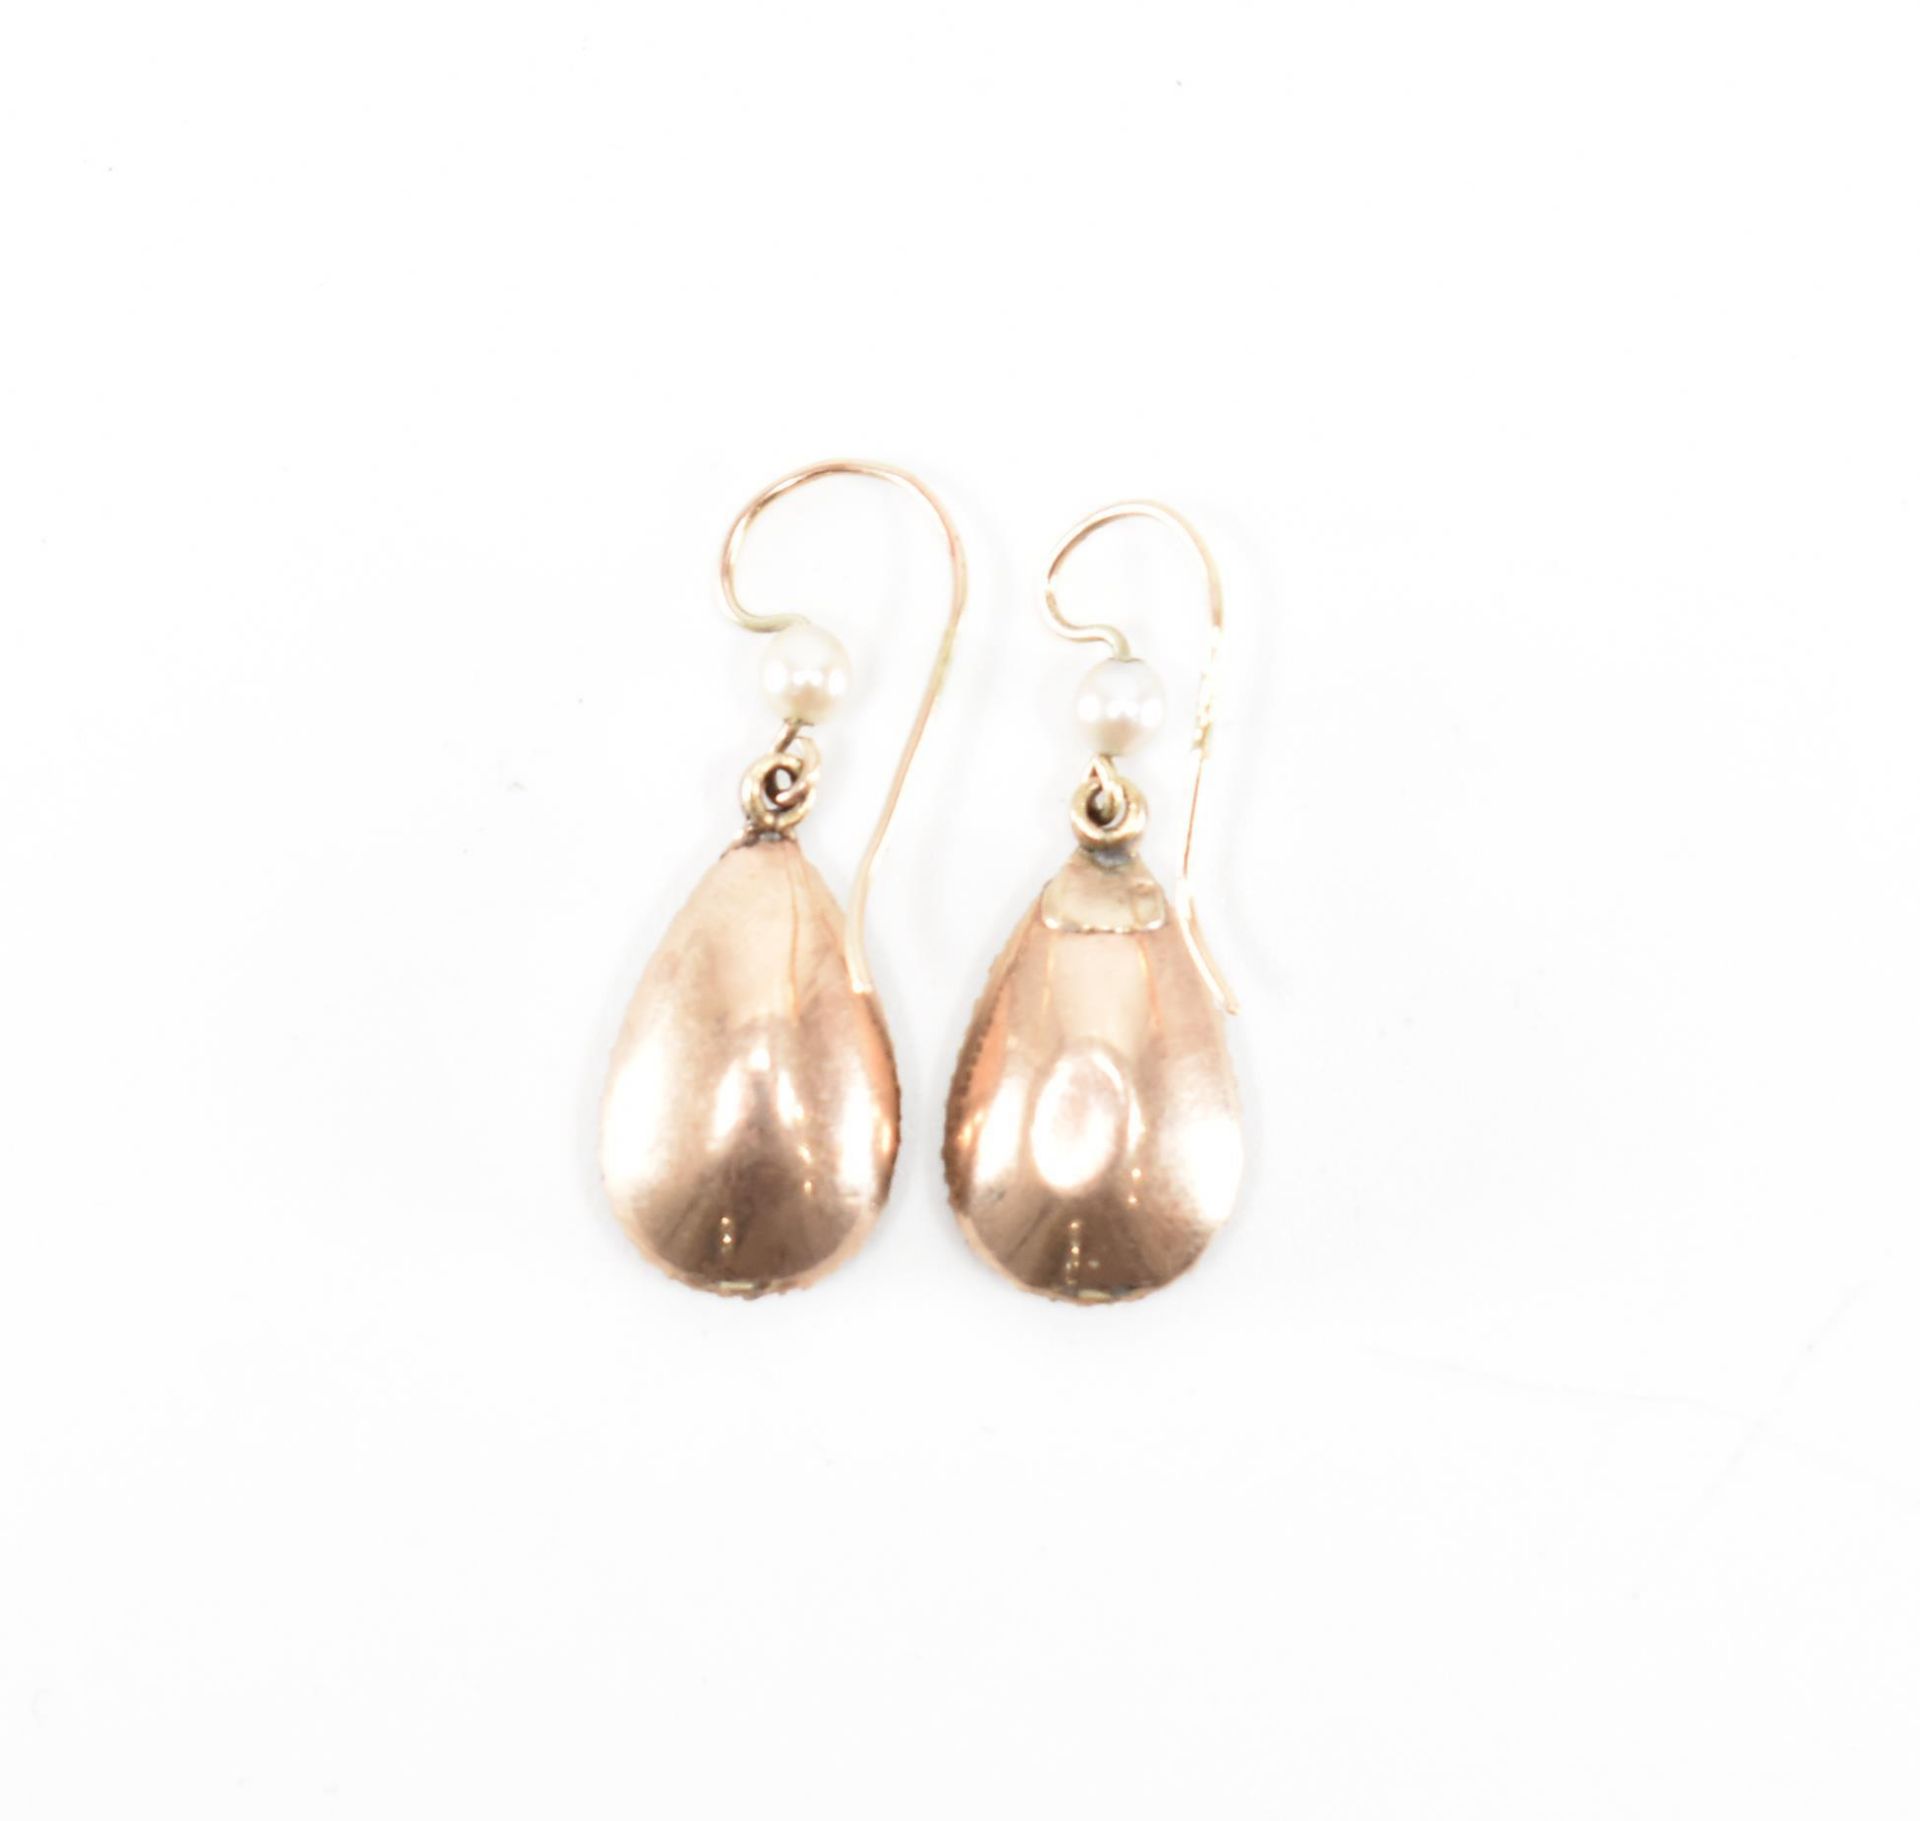 PAIR OF ANTIQUE GOLD FOIL BACK CRYSTAL DROP EARRINGS - Image 2 of 2